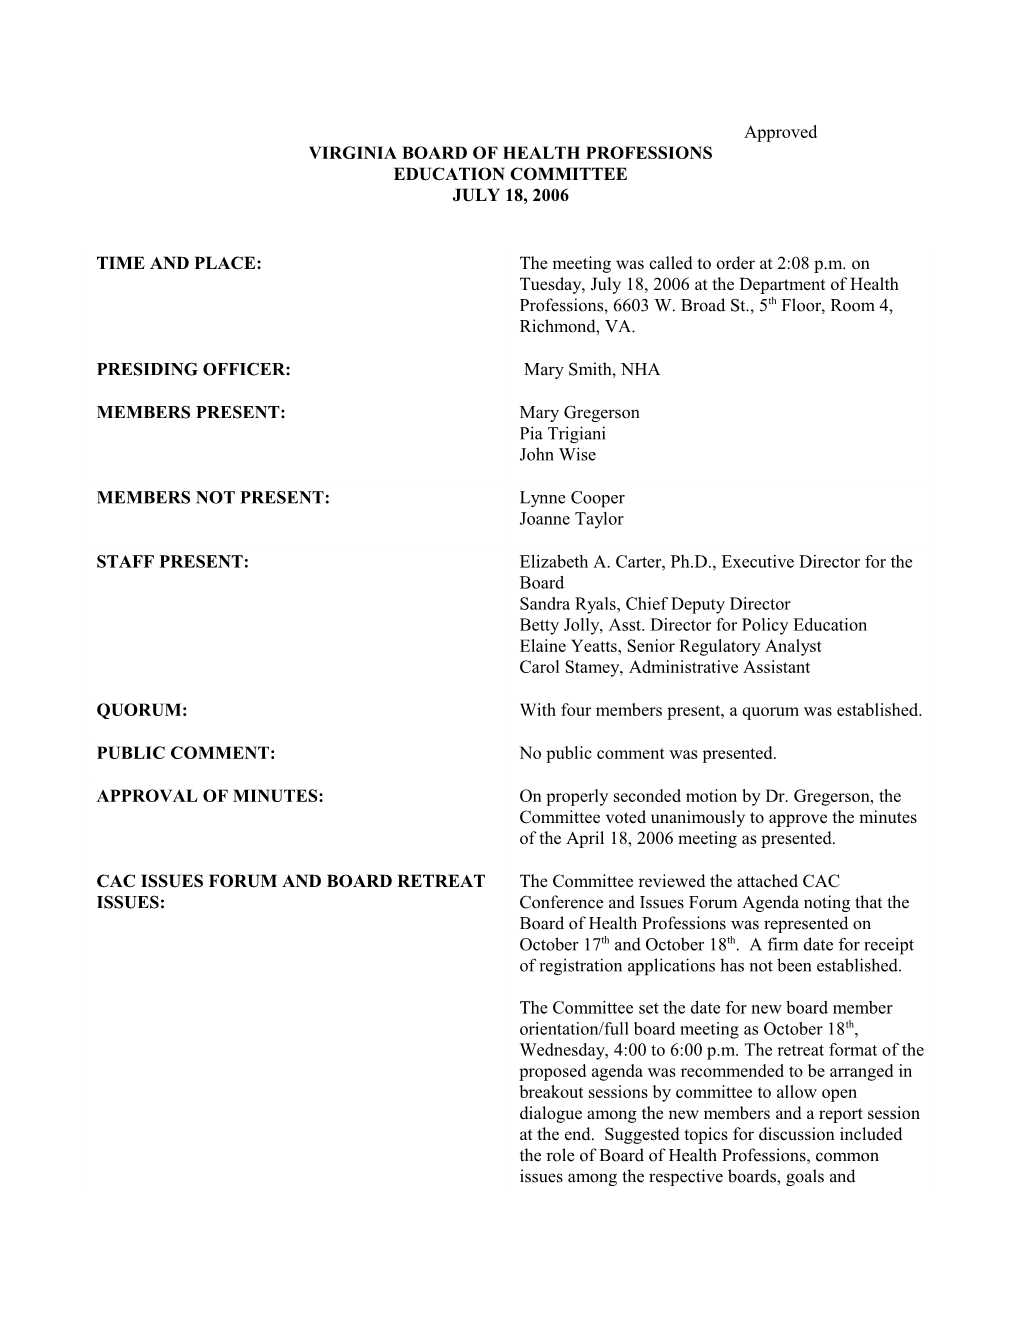 Appoved Minutes Board of Health Professions - July 18, 2006